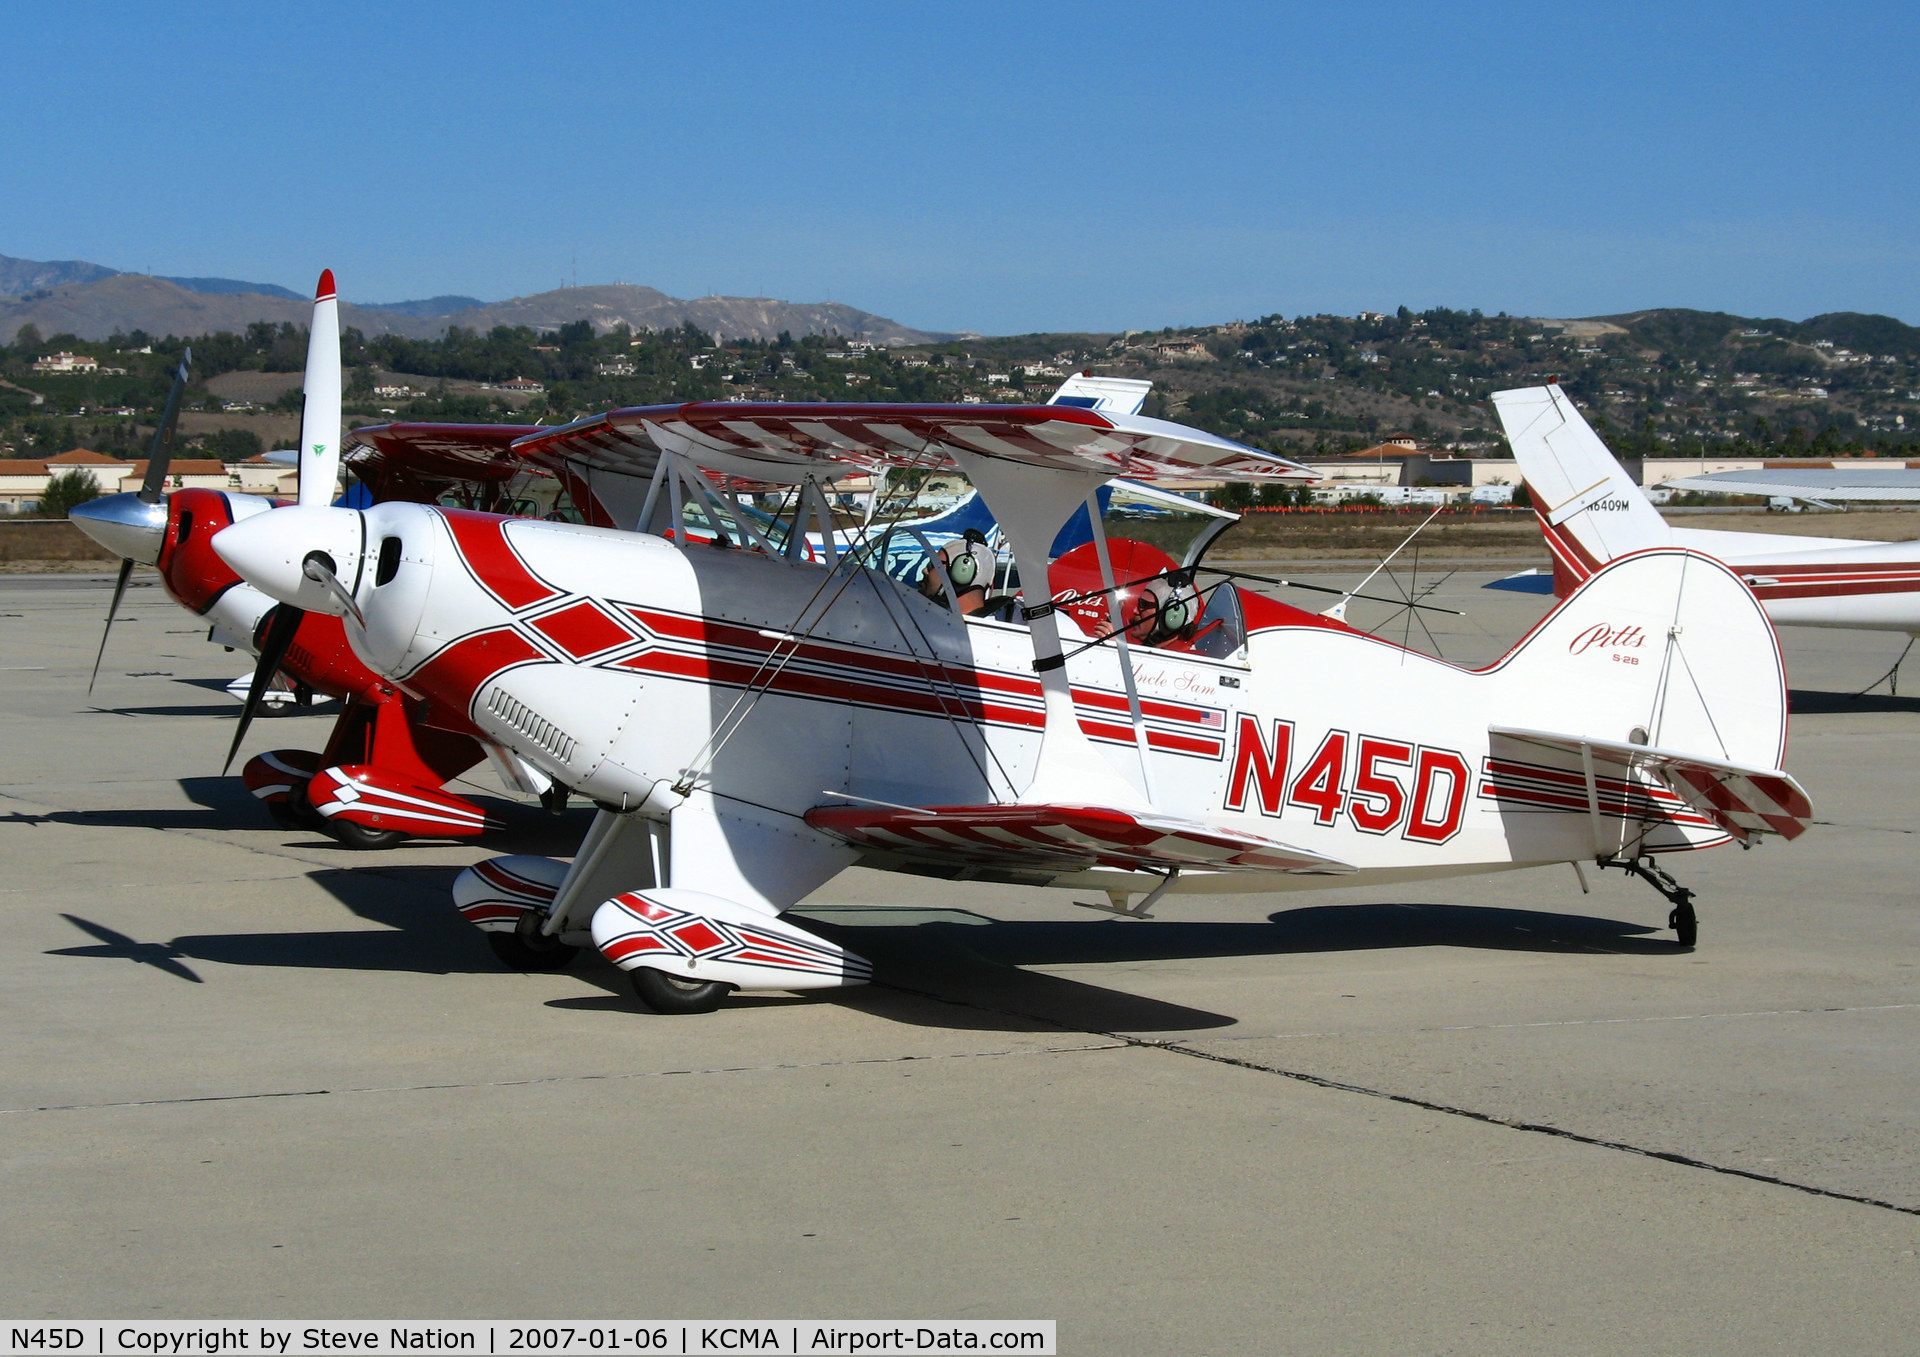 N45D, 1995 Aviat Pitts S-2B Special C/N 5332, 1995 Aviat PITTS S-2B on sunny visitors ramp after flight up from Torrance, CA with N36MT